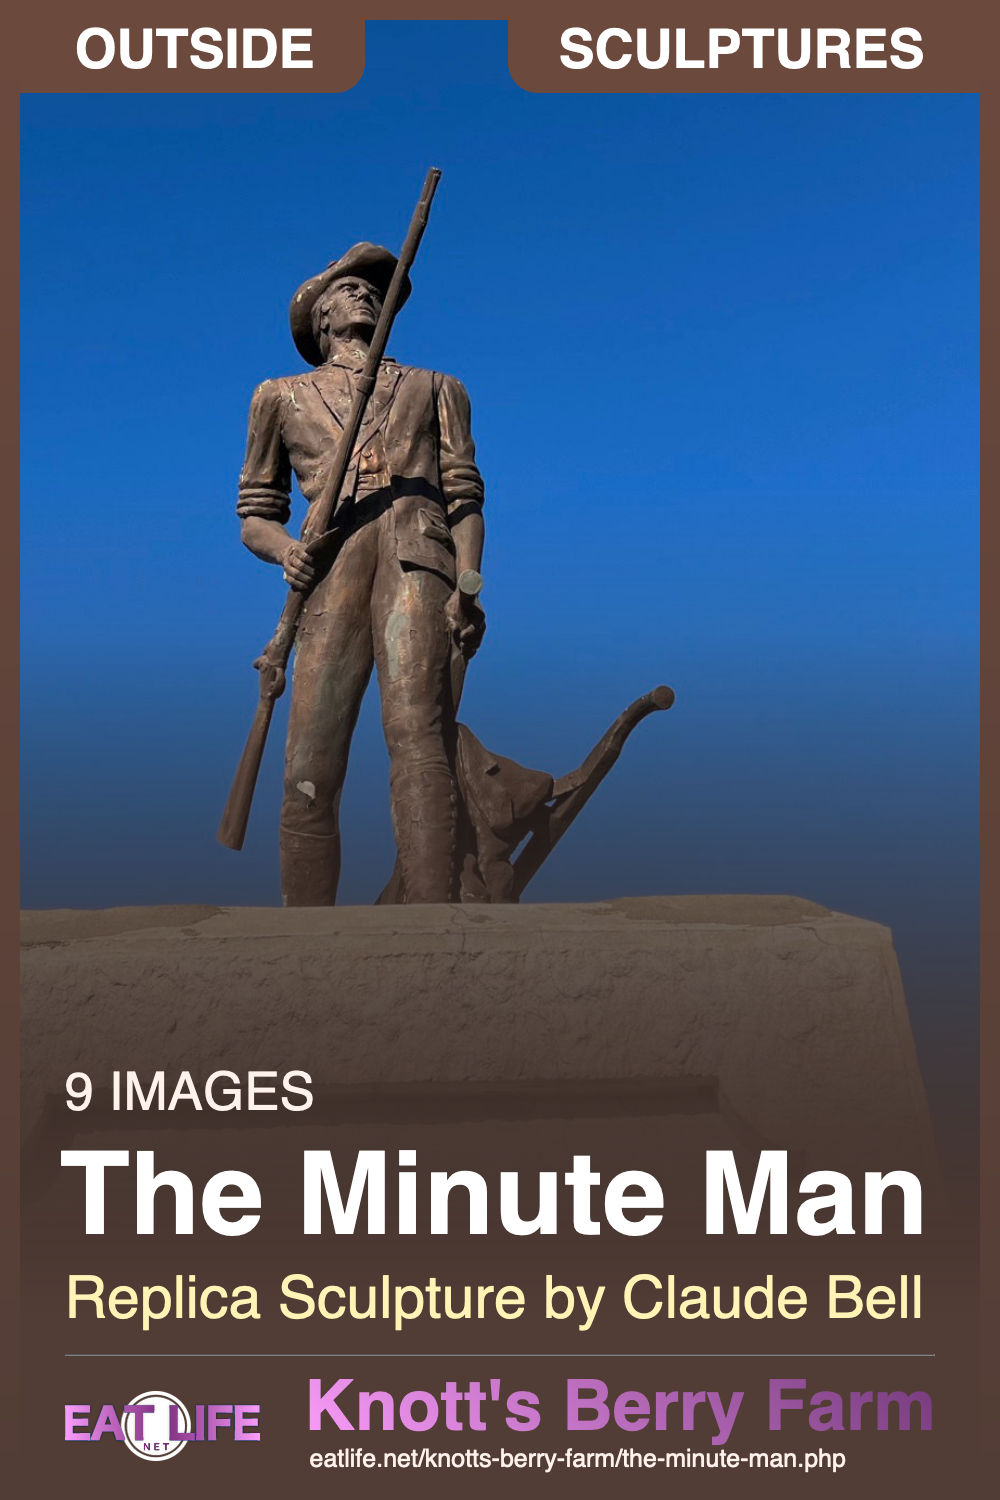 The Minute Man